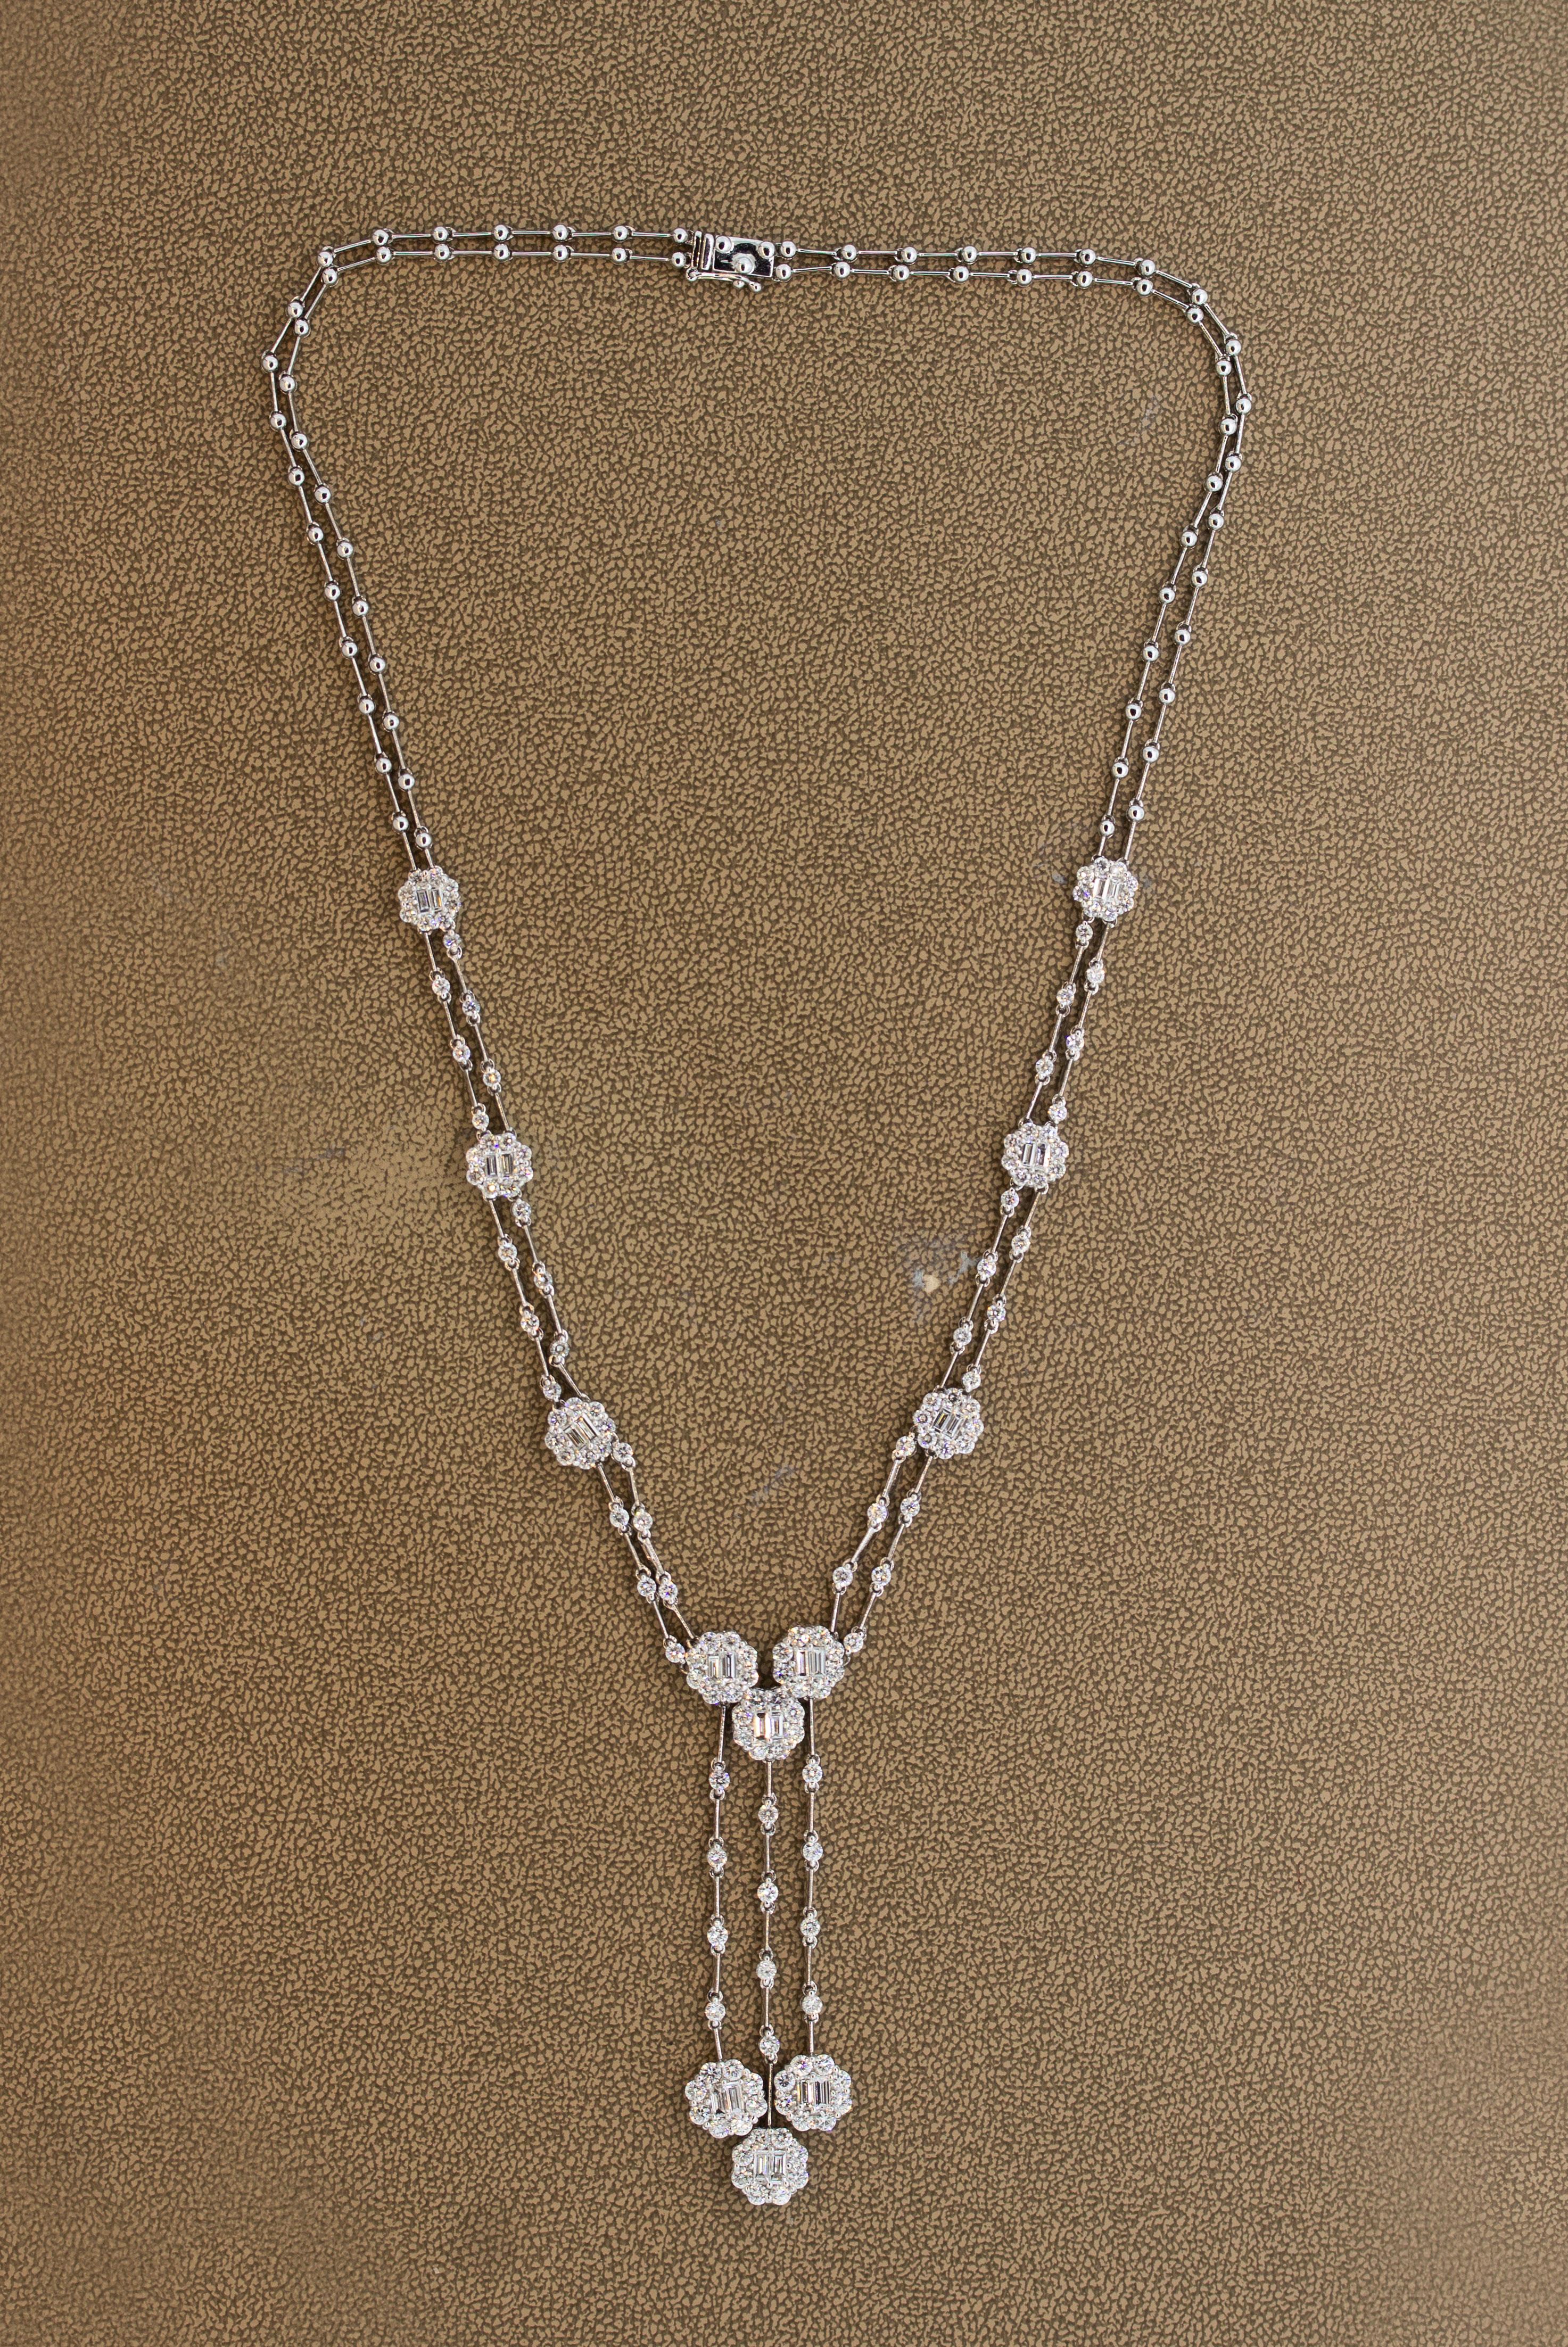 A beautiful diamond necklace featuring round brilliant and baguette cut diamonds weighing a total of 7.03 carats. Each round “stallion” is set with 2 baguette cut diamonds next to each other with a round cut halo around them. The bottom of the